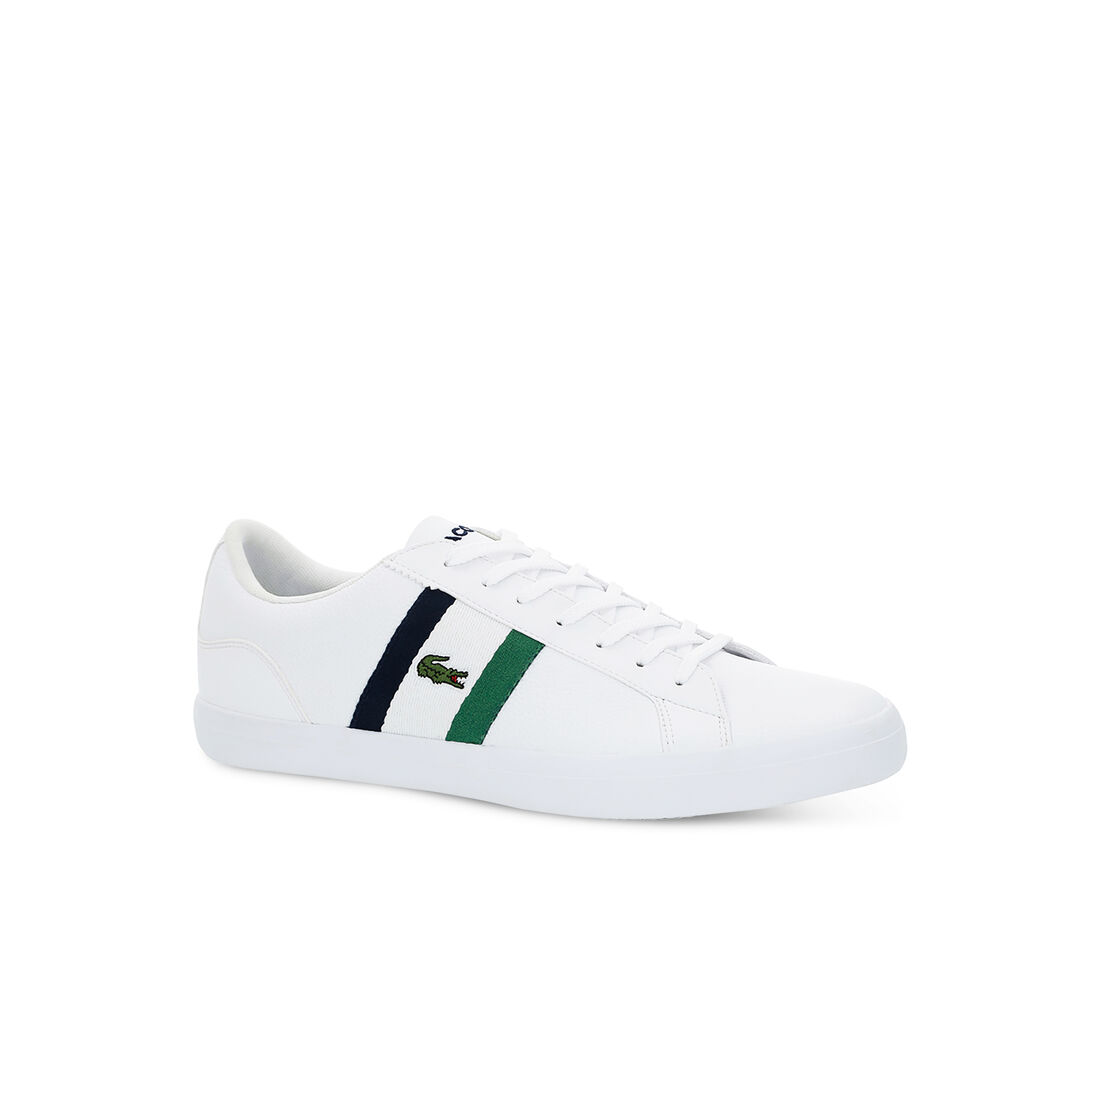 Men's Lerond Tumbled Leather Trainers